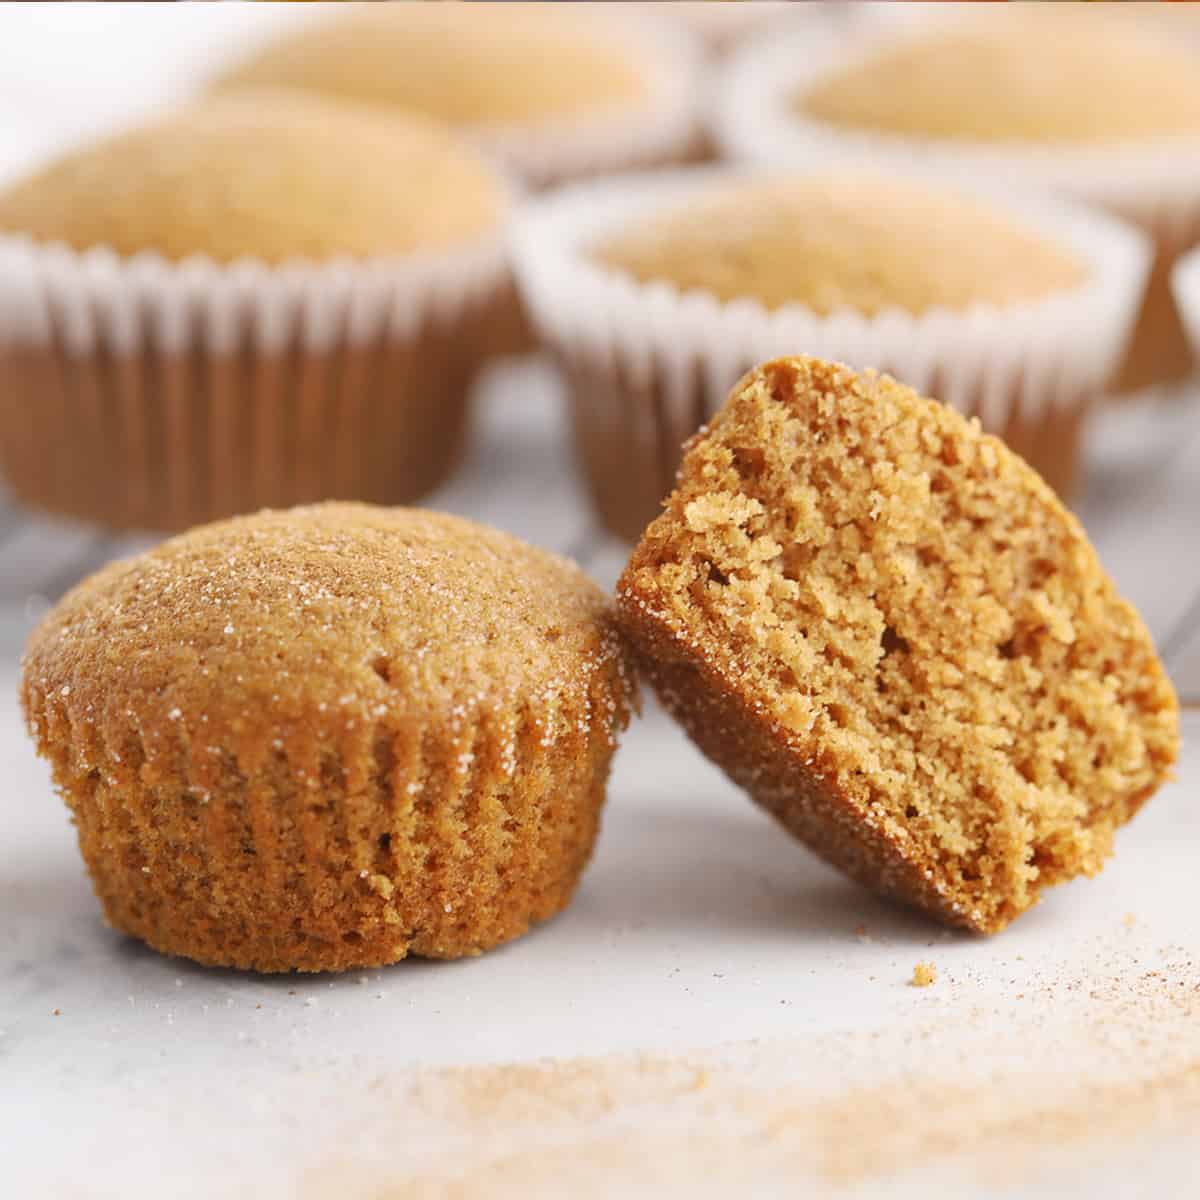 applesauce muffins recipe with sugar topping for muffins